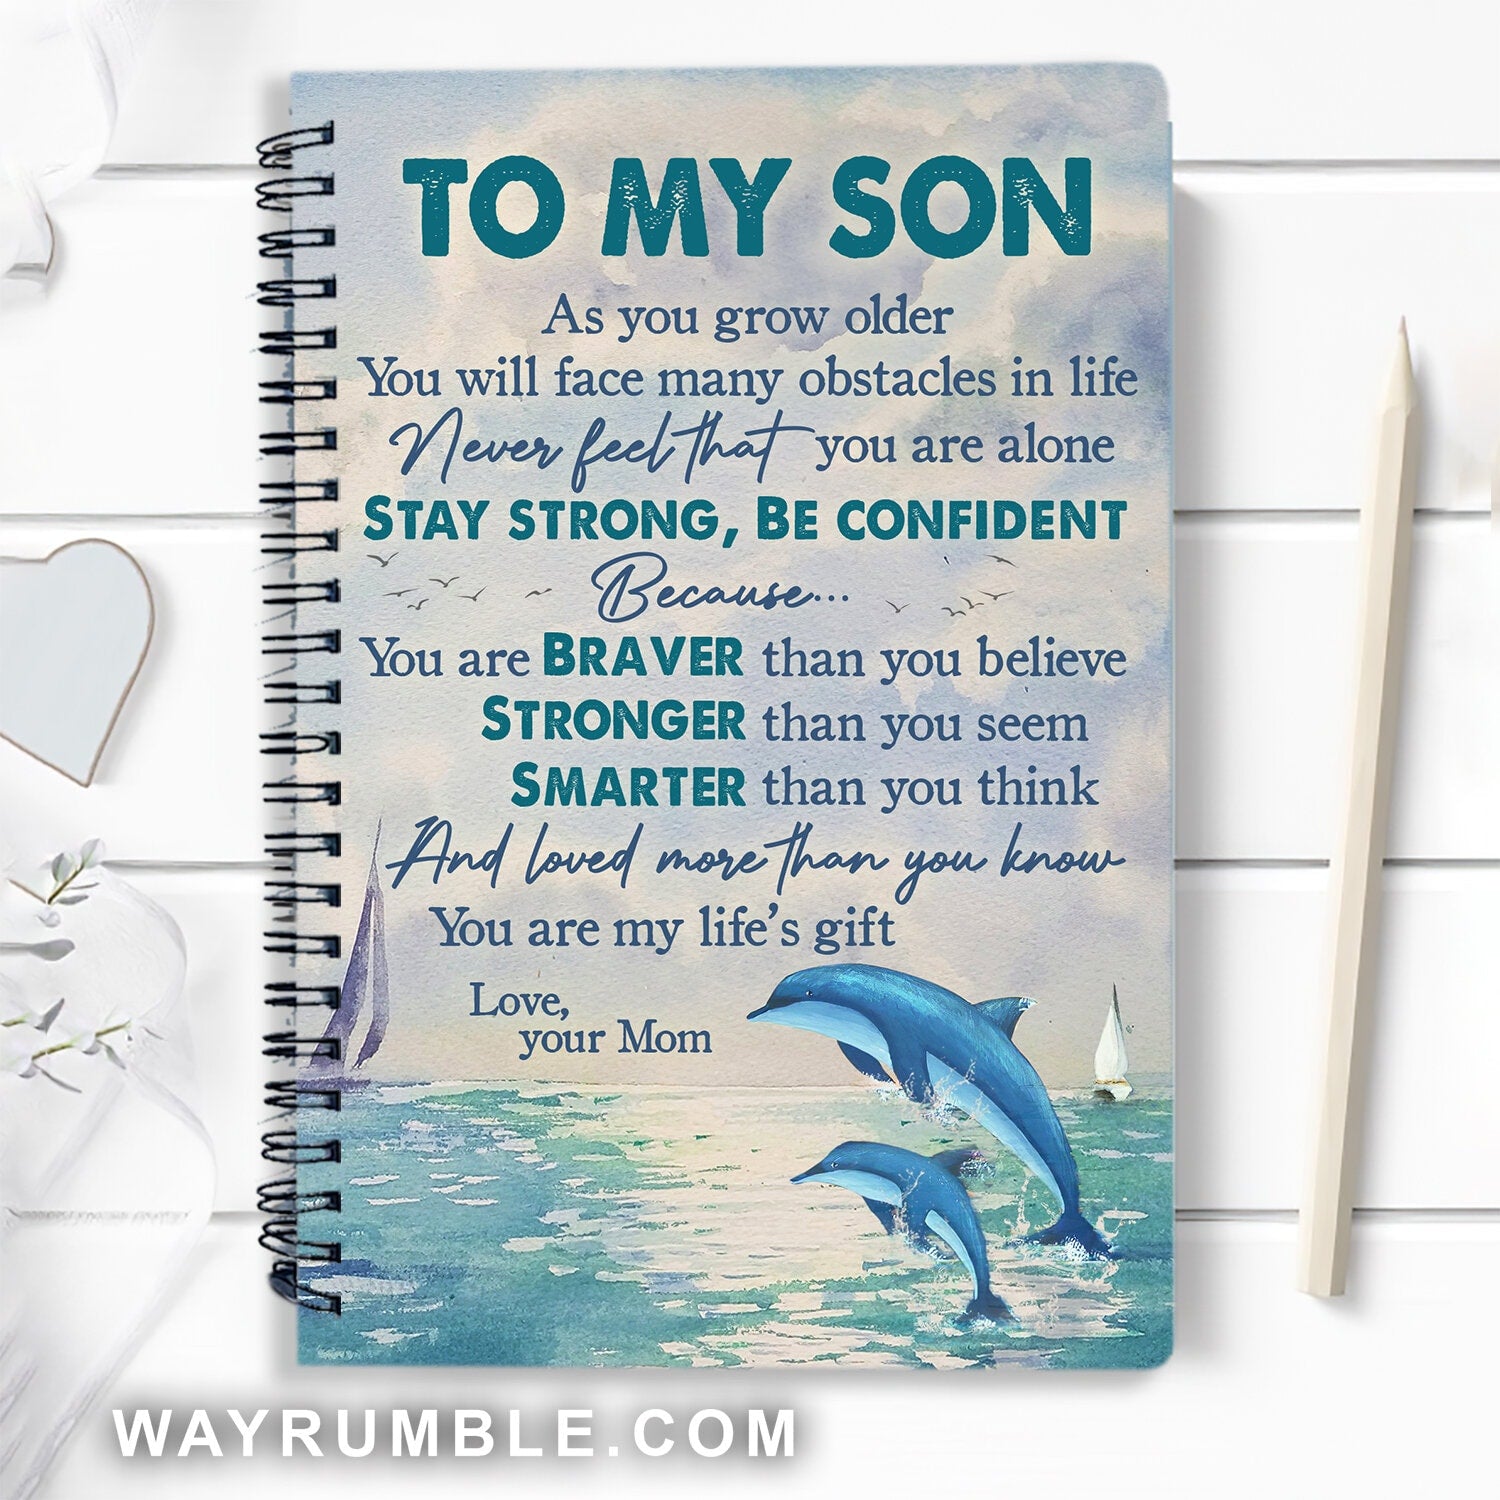 To my son, Dolphin painting, You are braver than you believe - Family Spiral Journal